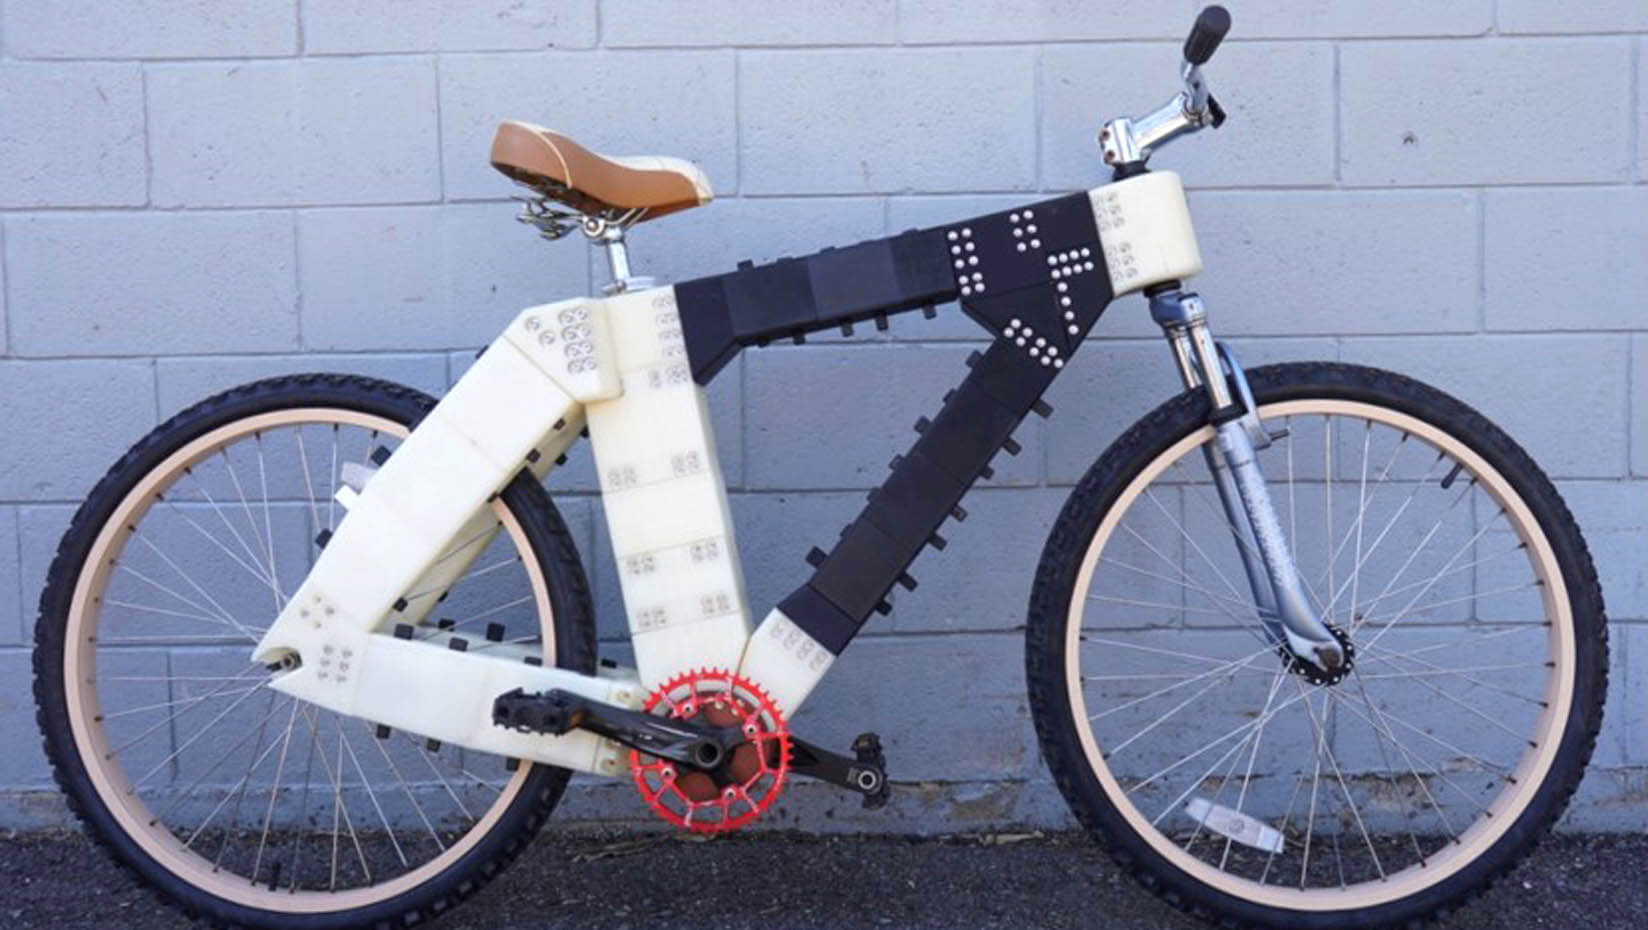 Bicycle with 3D-printed frame created by UMaine students.